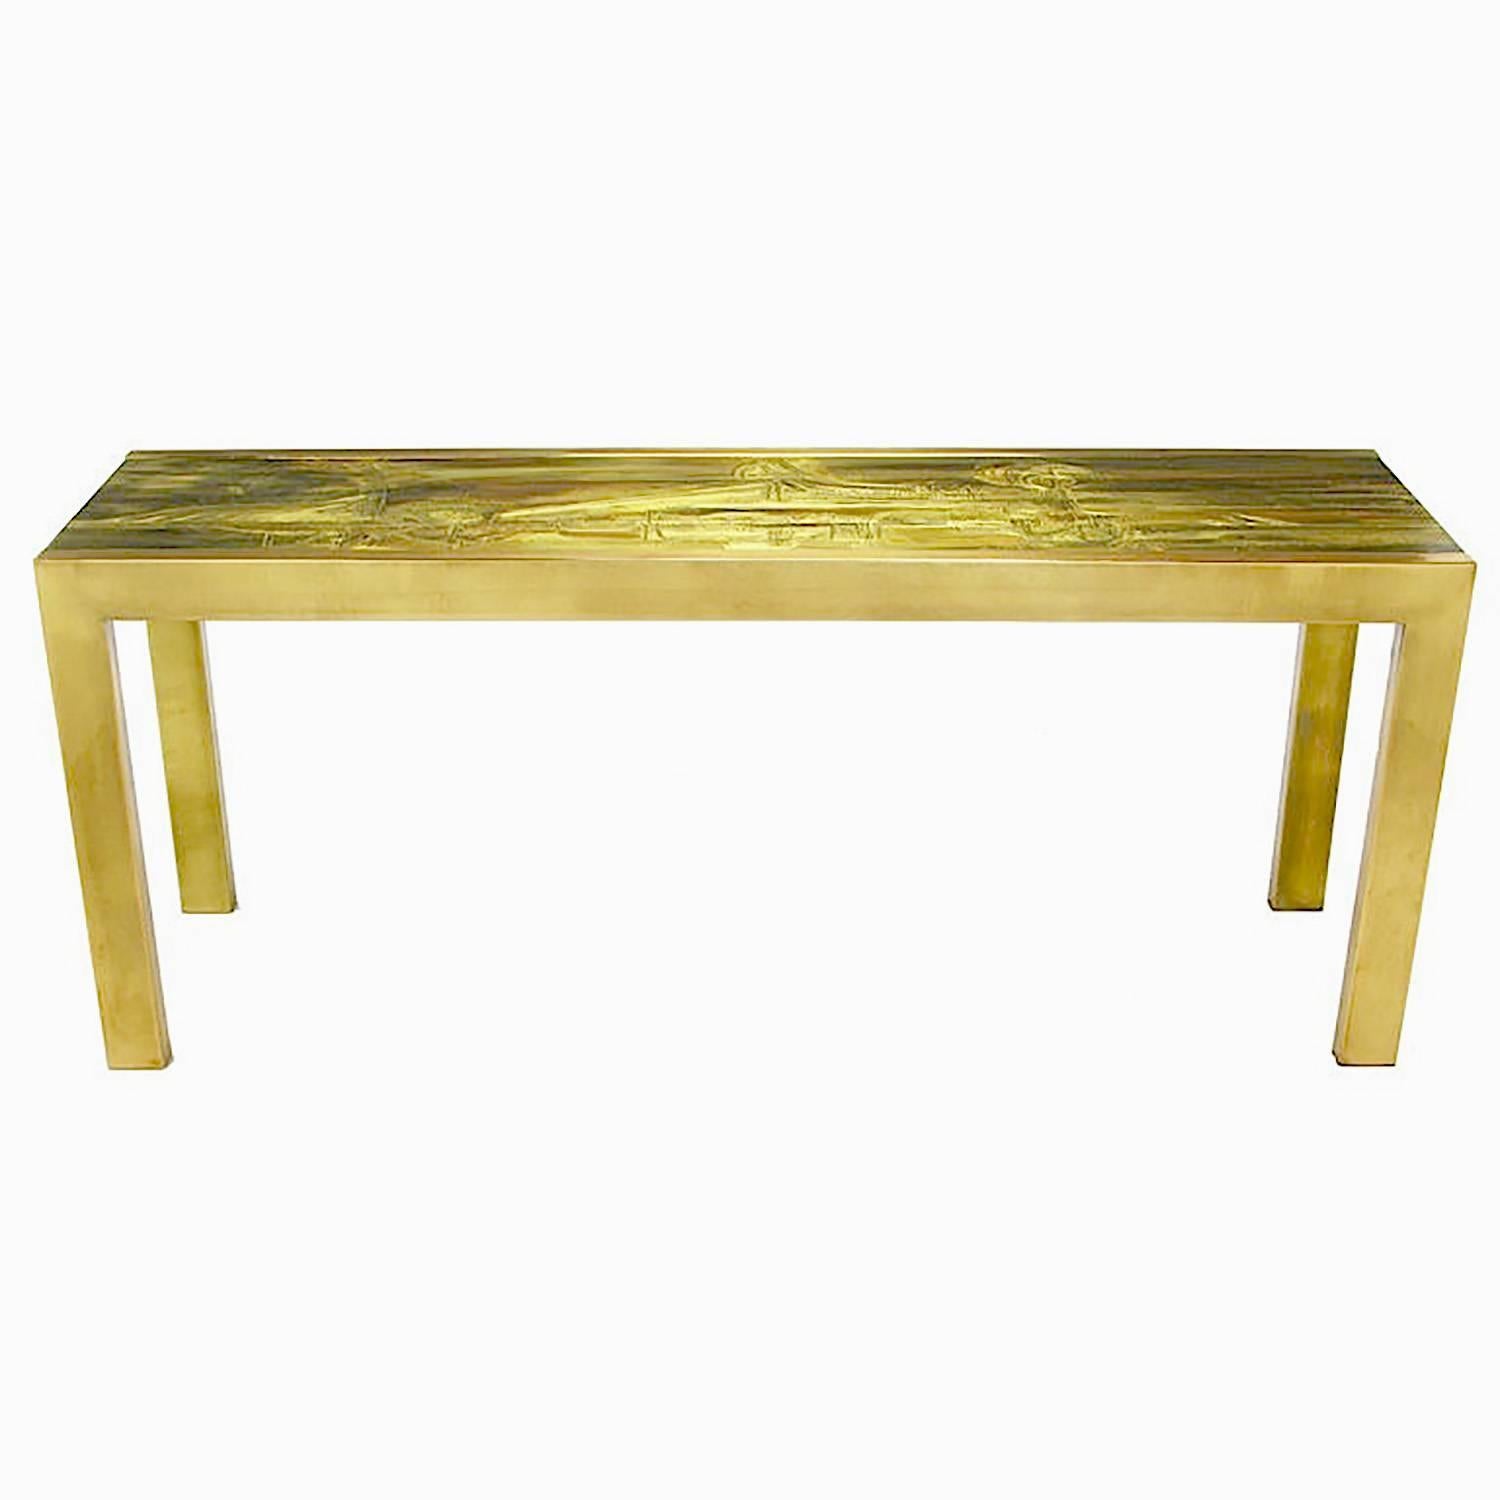 Mastercraft Brass Console with Bernhard Rohne Acid-Etched Top